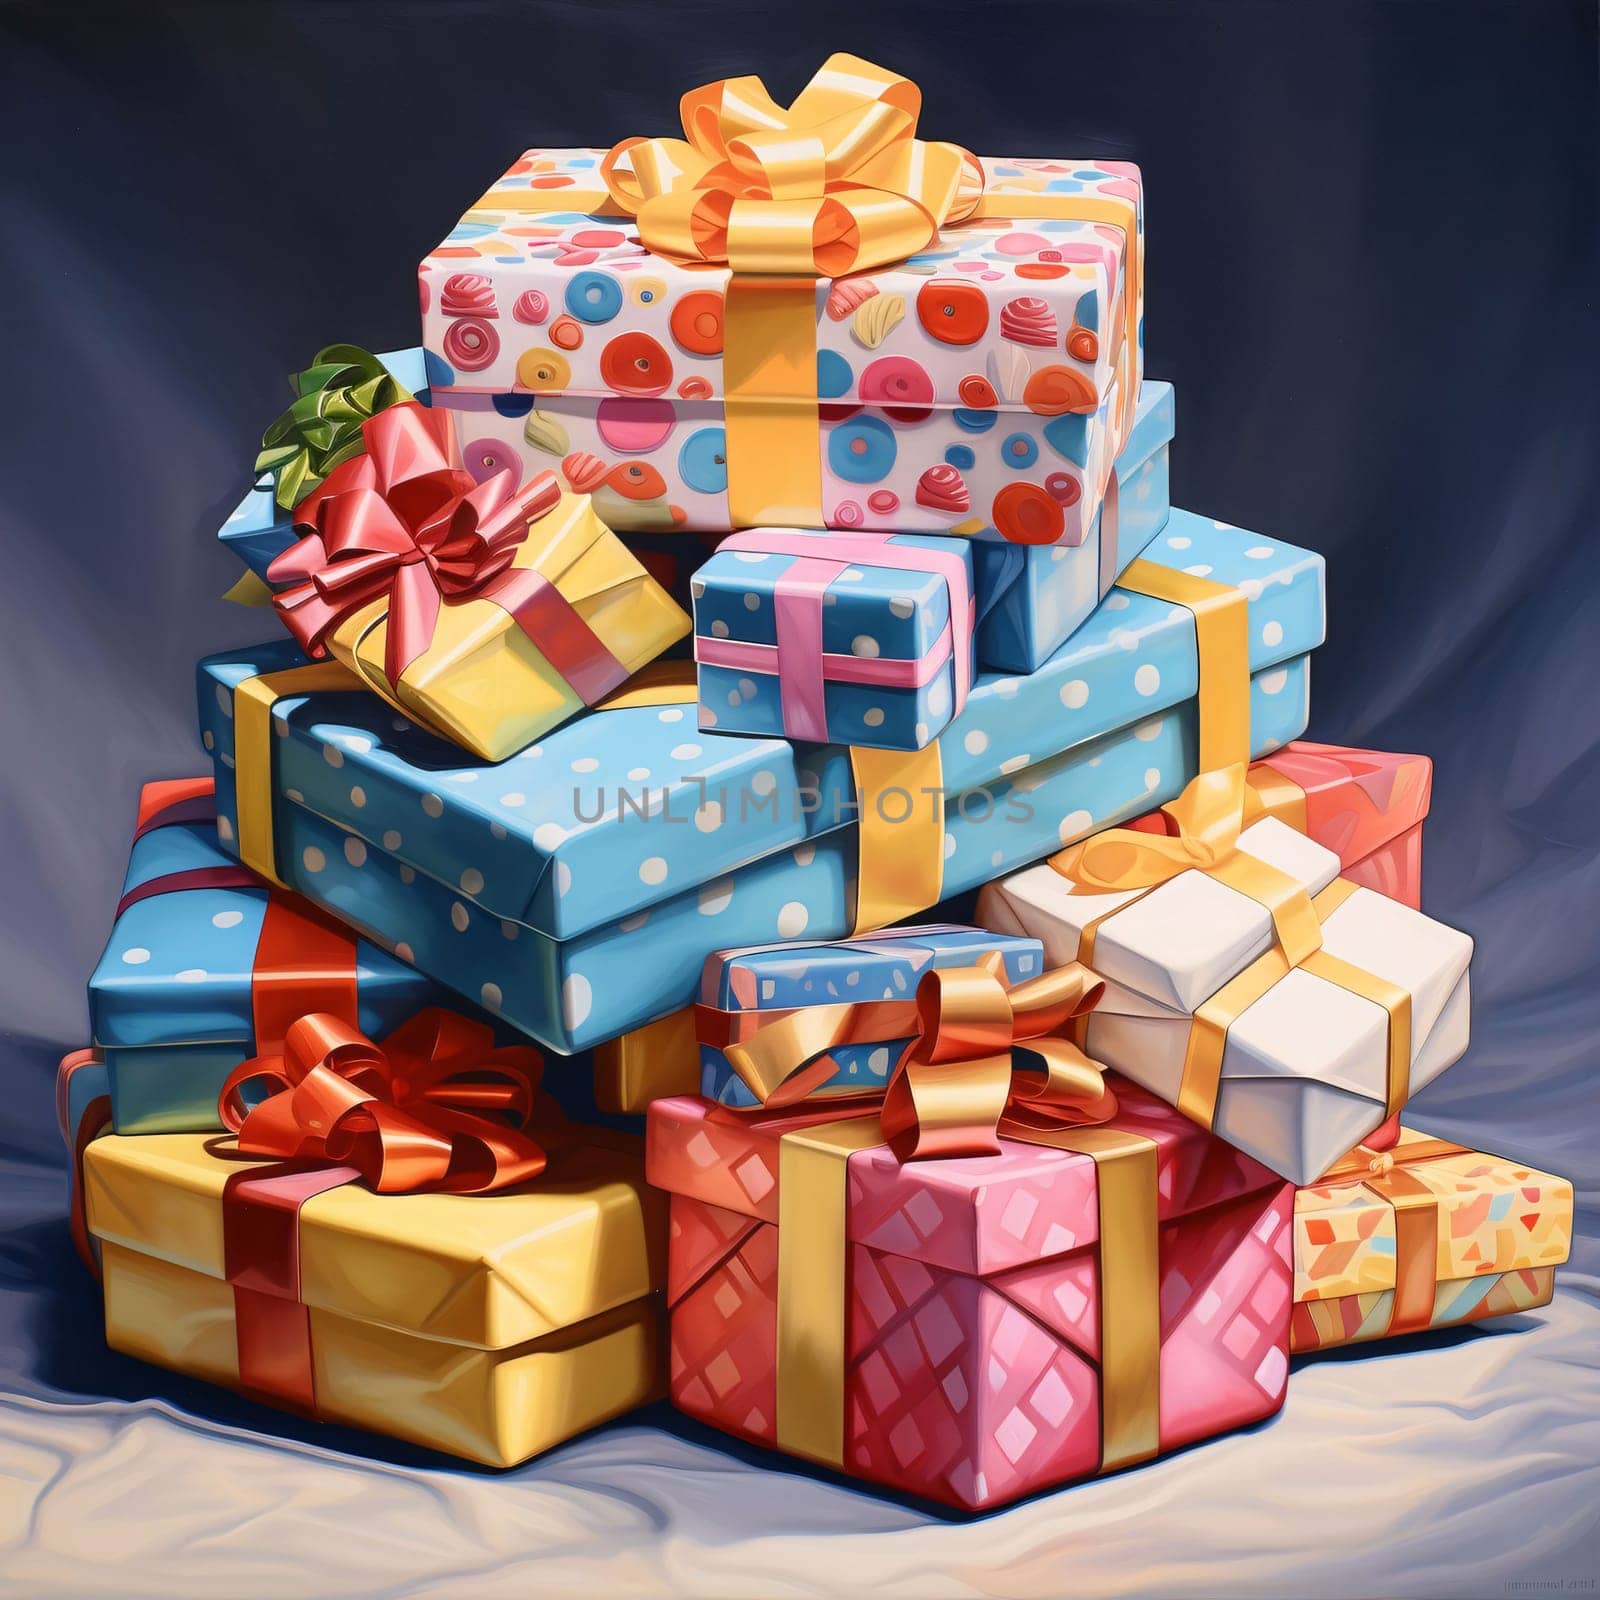 Heap of colorful gifts with bows on dark background, illustration. Gifts as a day symbol of present and love. A time of falling in love and love.